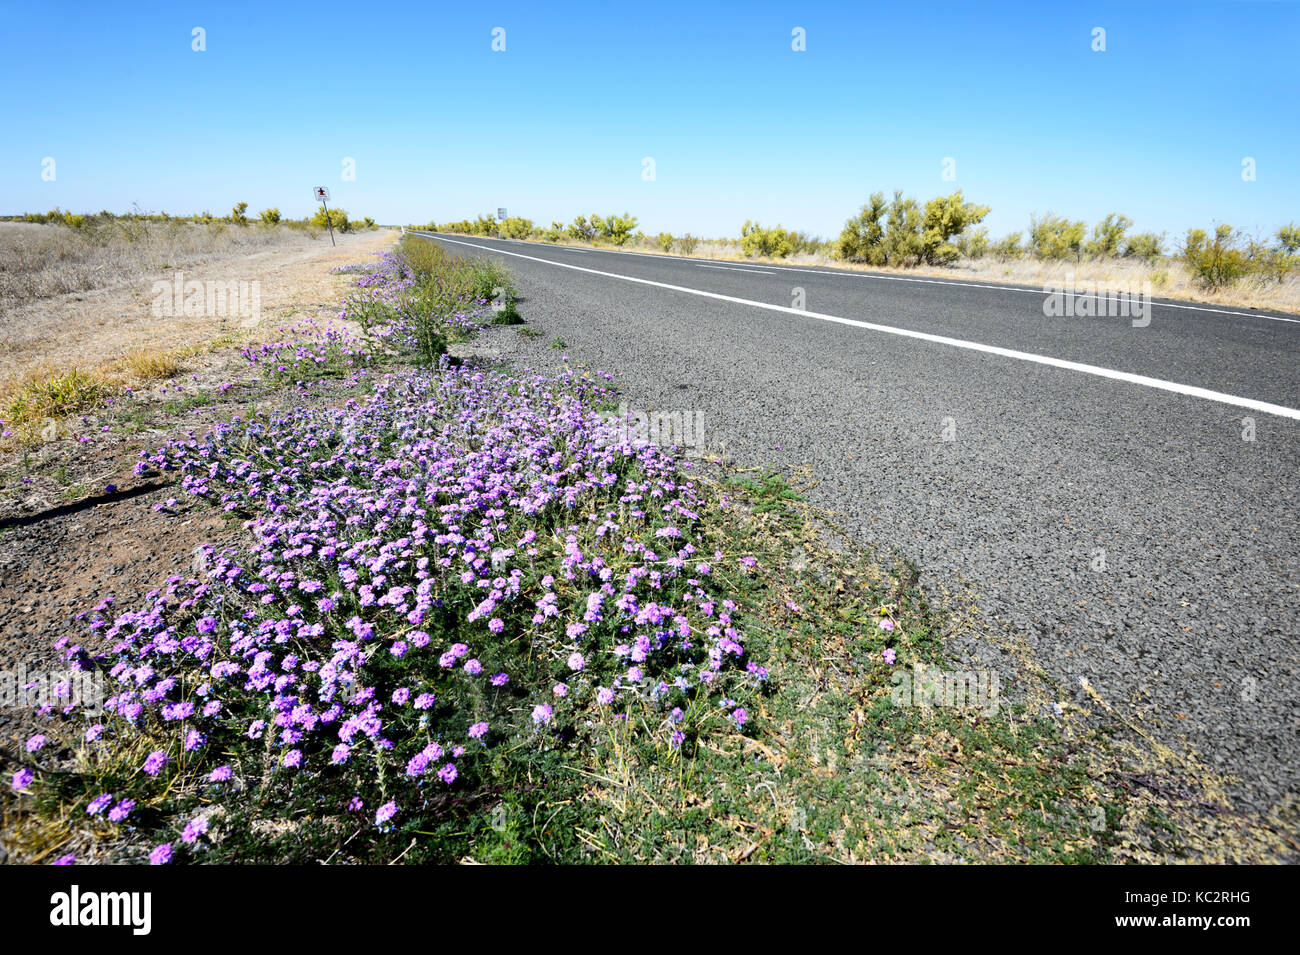 Wildflowers in Spring along the Matilda Highway near Charleville, Queensland, QLD, Australia Stock Photo